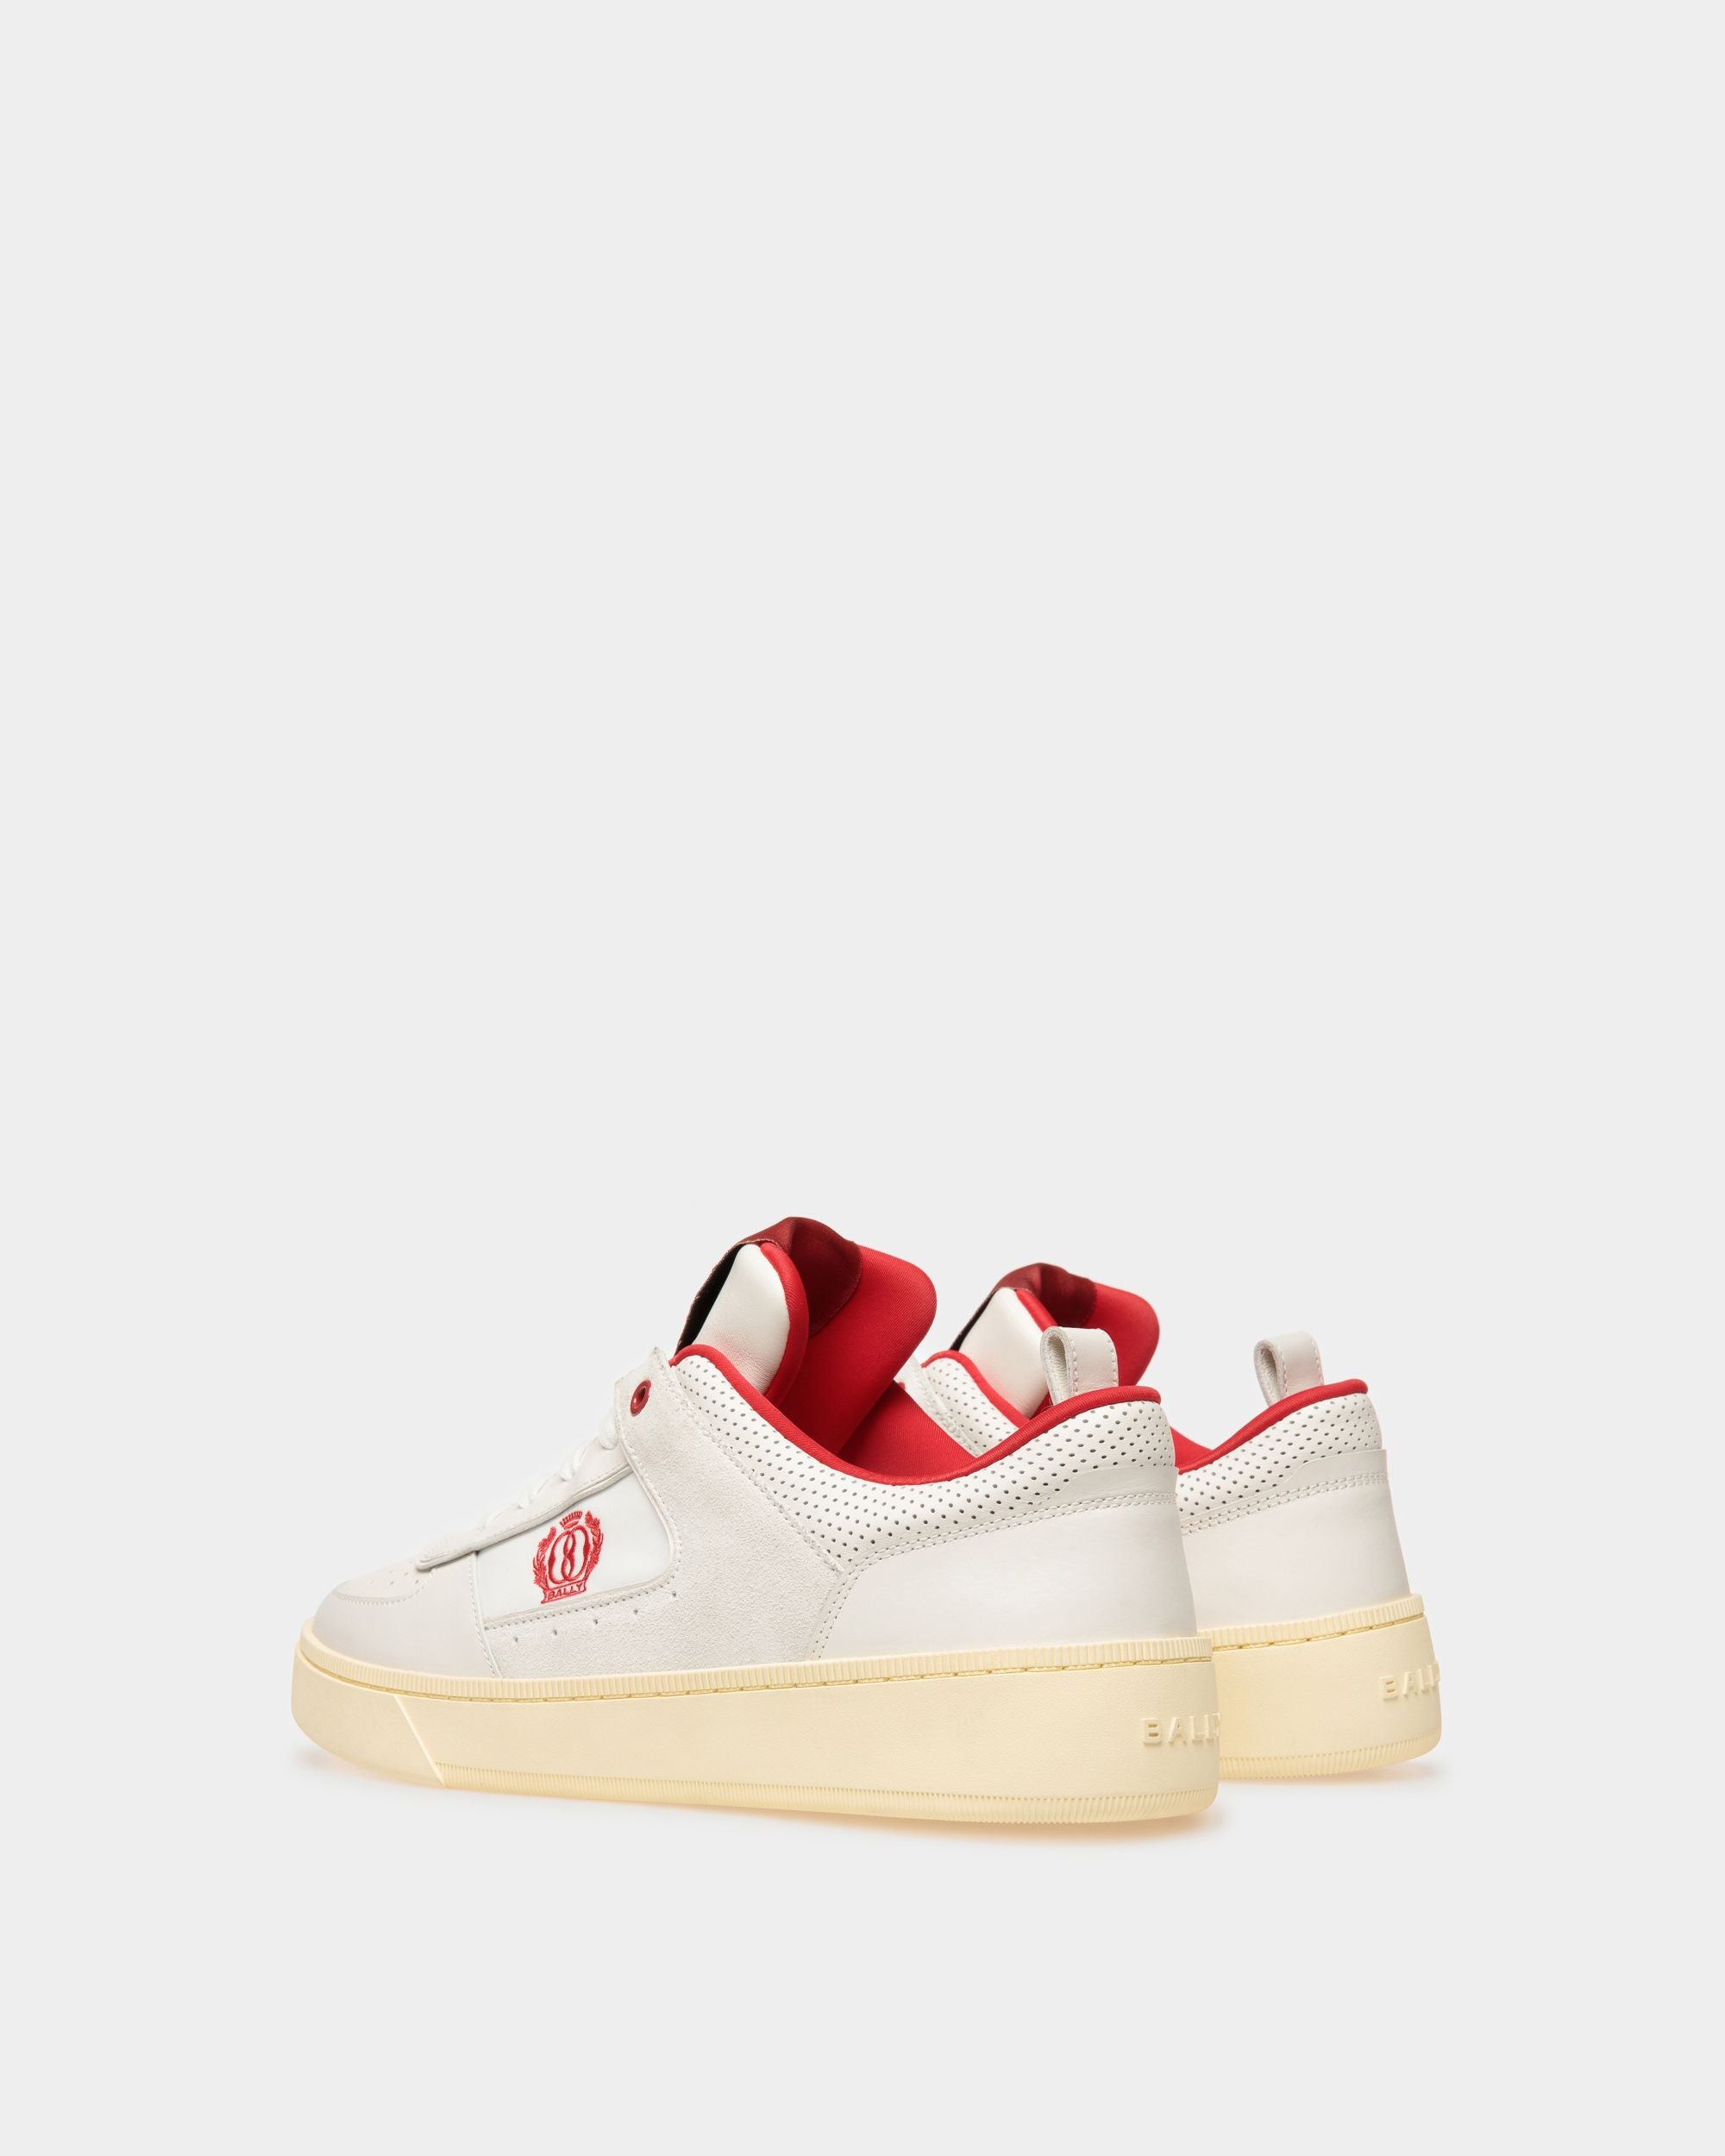 Riweira | Women's Sneakers | White And Red Leather | Bally | Still Life 3/4 Back